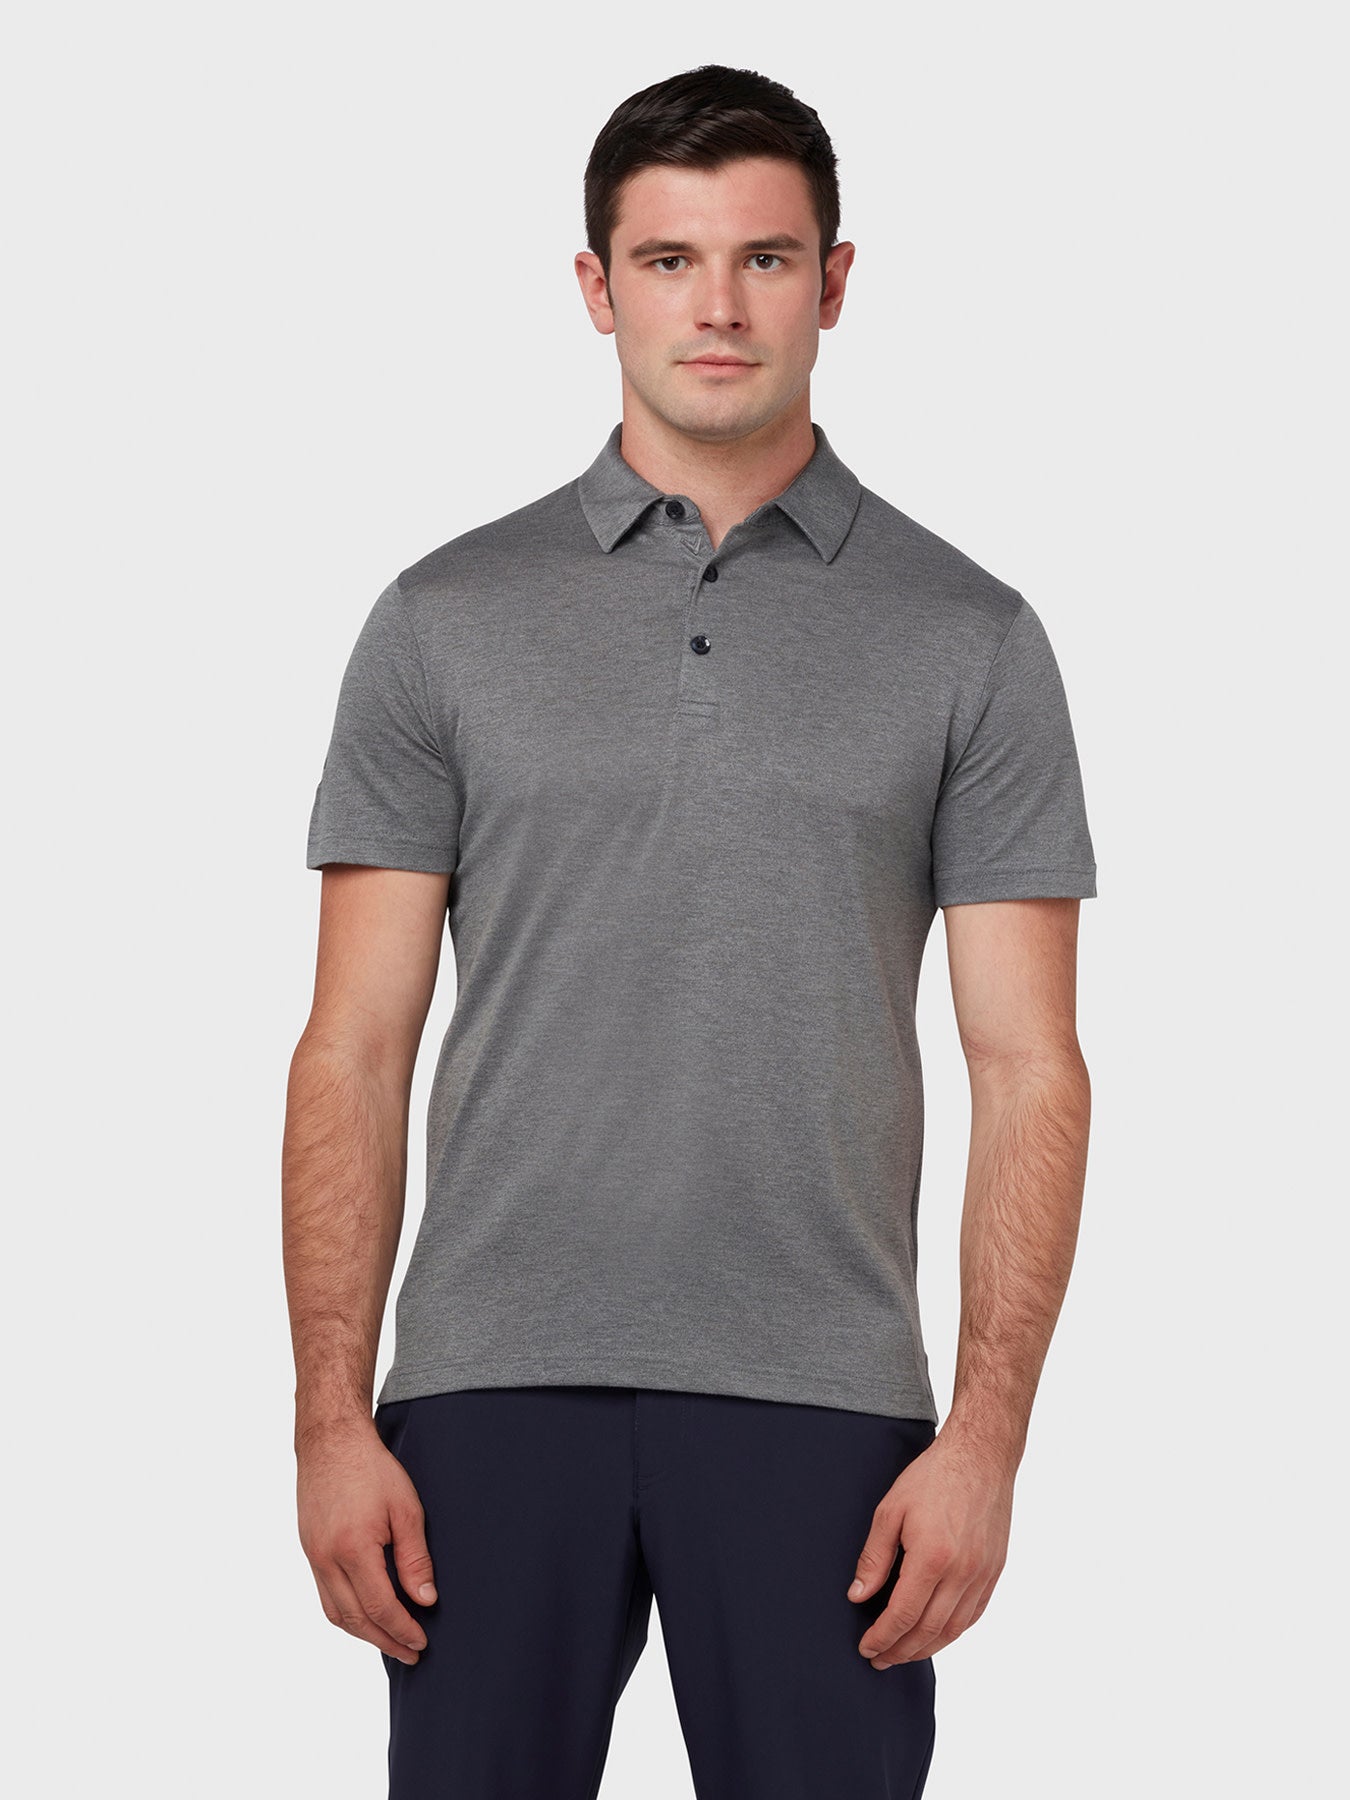 View Soft Touch Solid Polo In Black Heather information